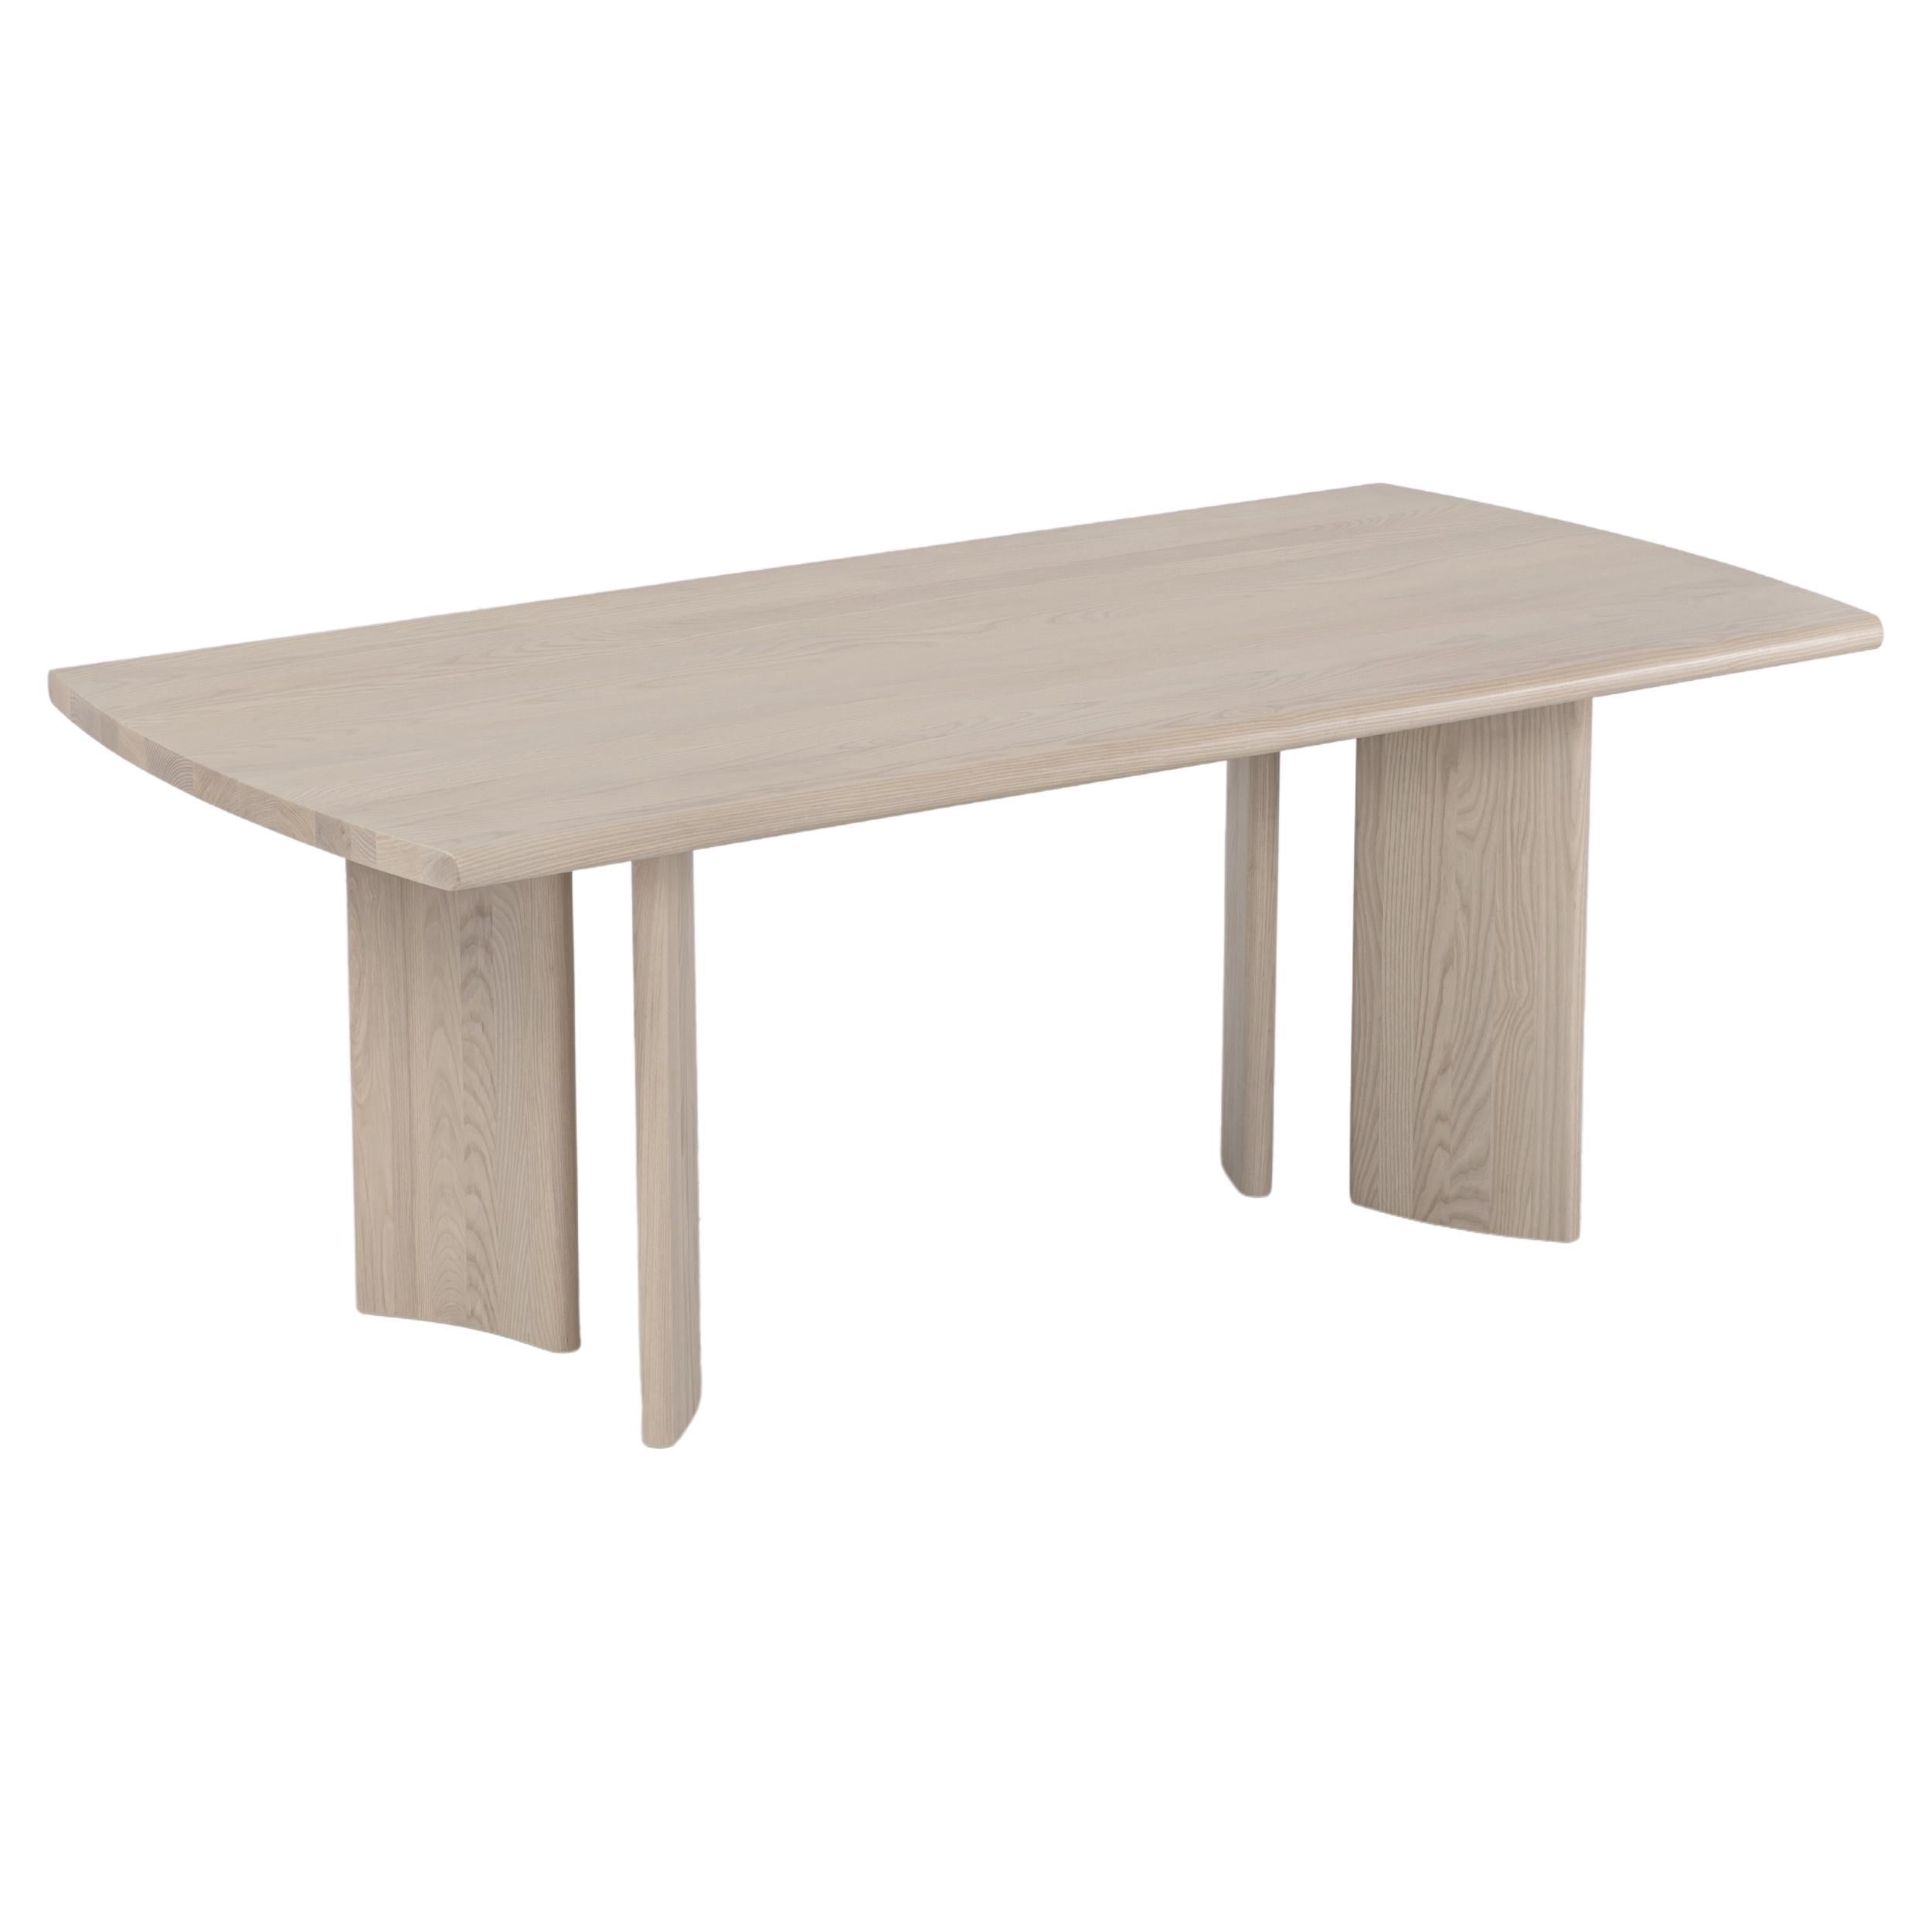 Crest Table 78" in Nude, Minimalist Dining Table in Wood For Sale